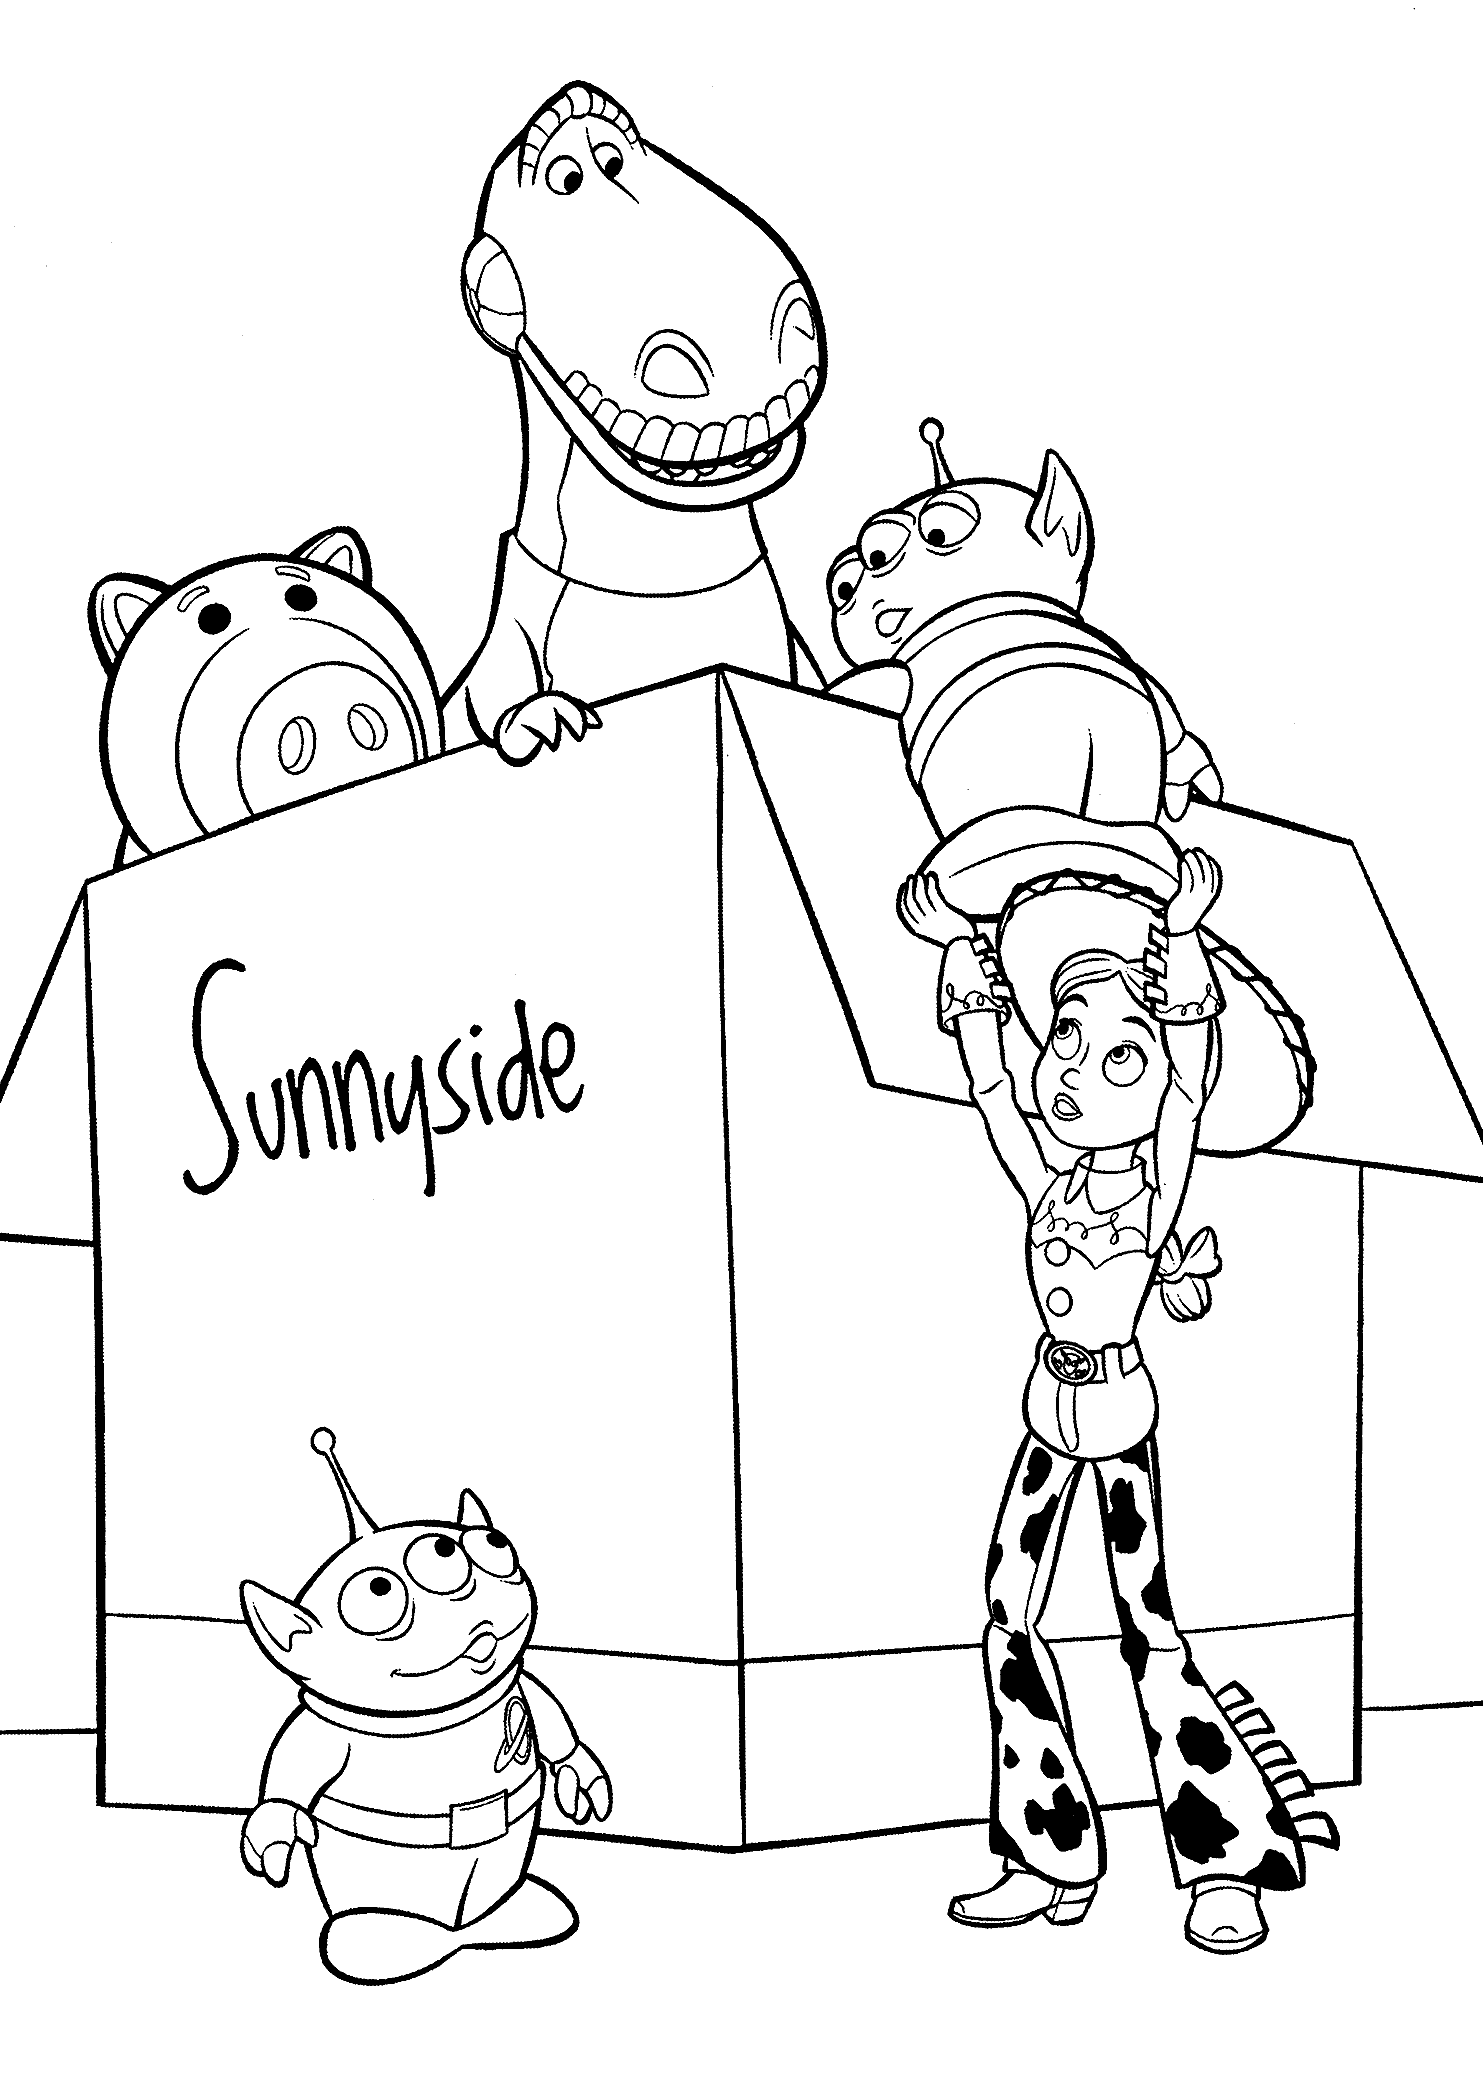 Jessie Helping Toys Coloring Page